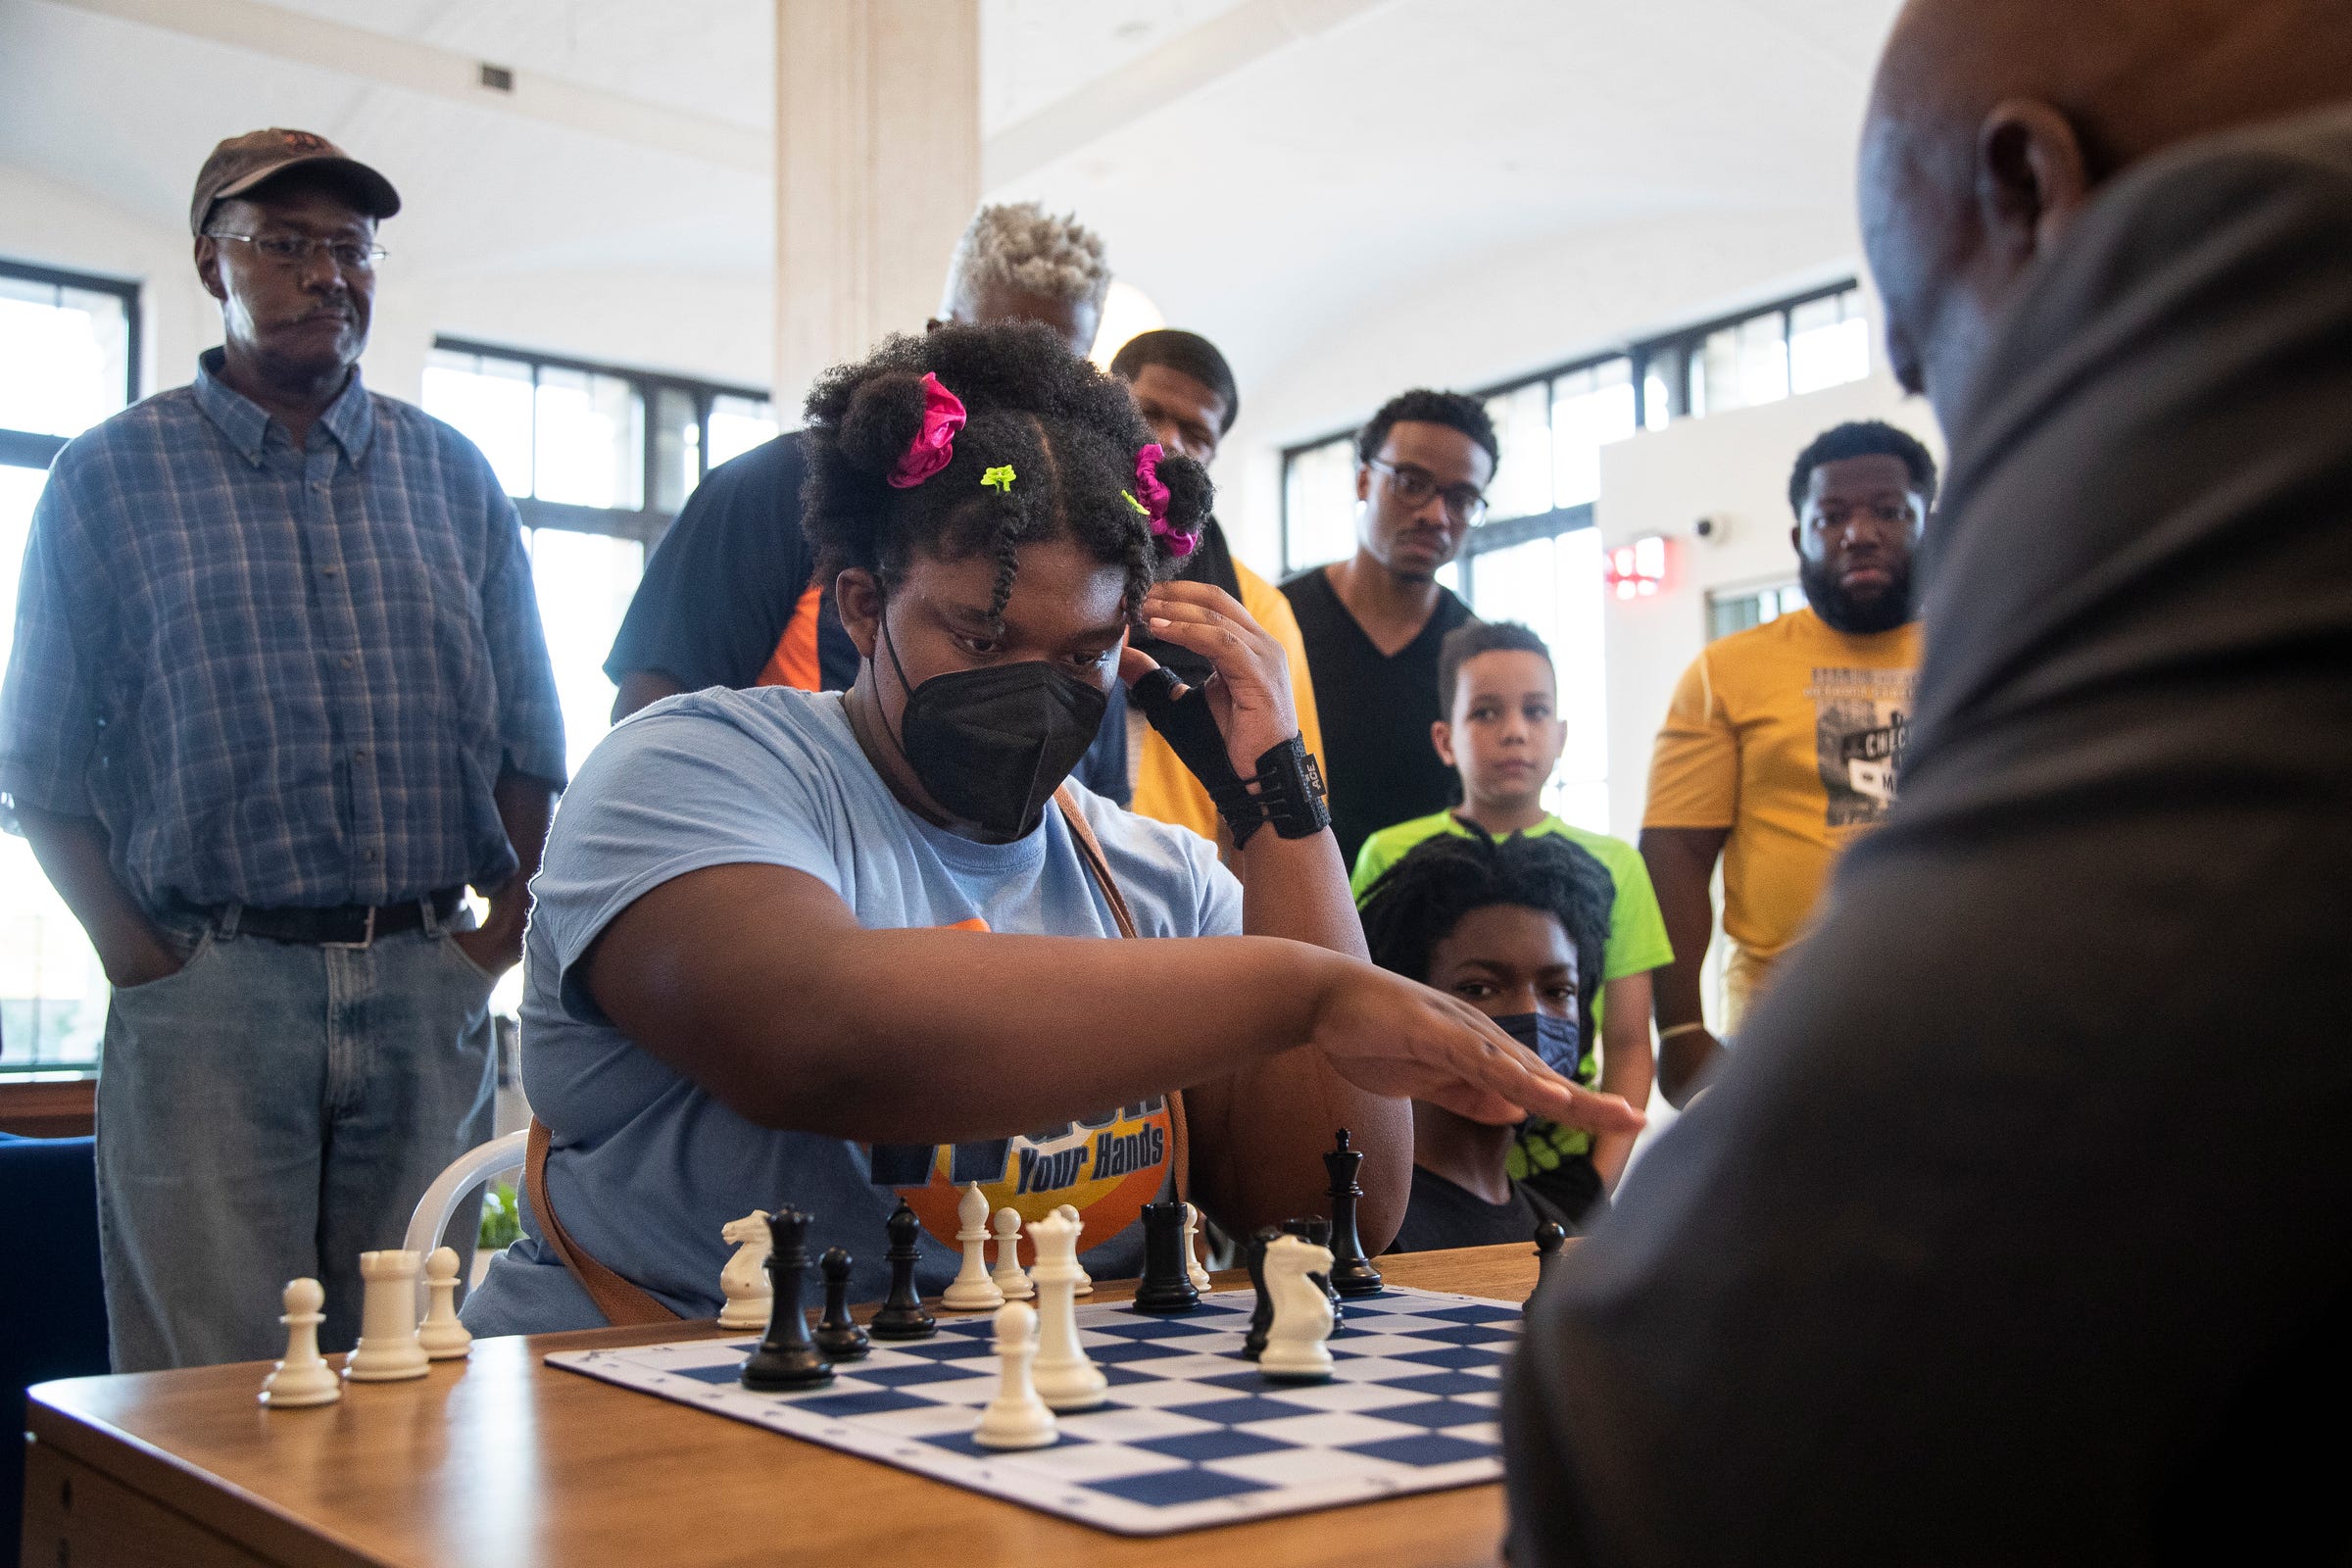 Charisse Woods, 17, a member of Detroit Chess Club, plays blitz chess with grandmaster Maurice Ashley at WeWork offices in Detroit on Friday, August 19, 2022. Ashley earned the grandmaster title in 1999 as the first African American to do so.